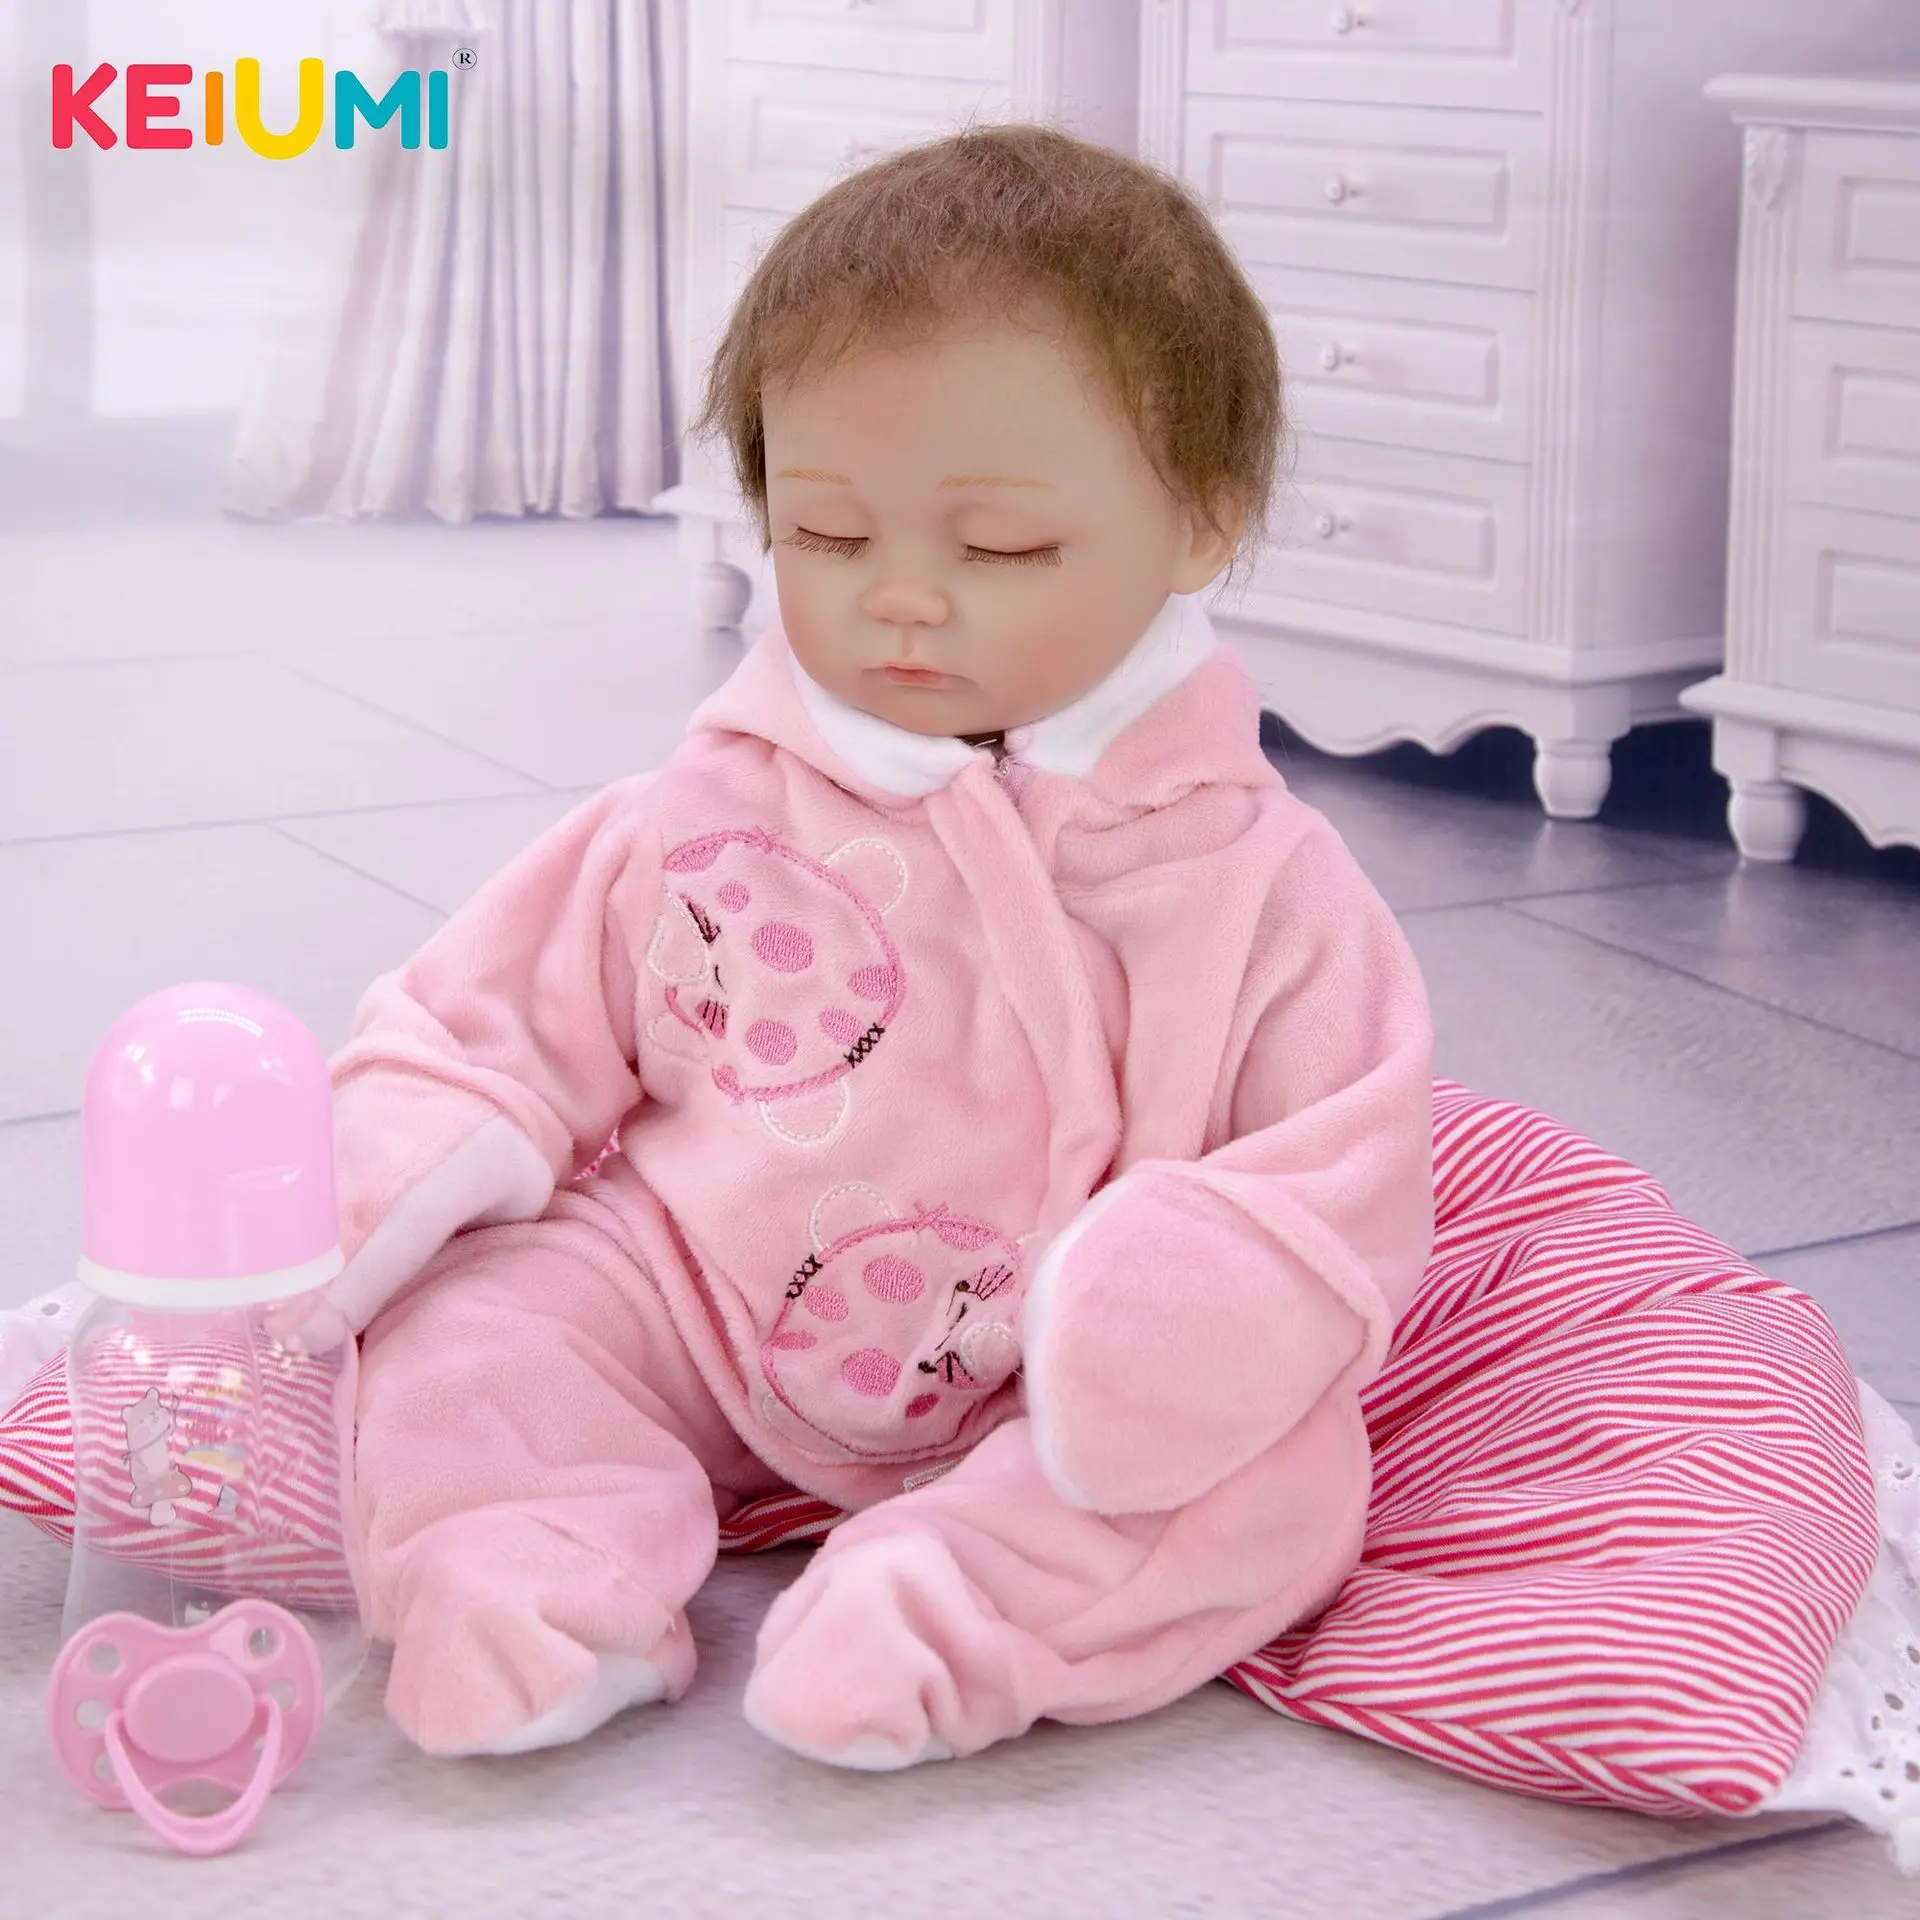  Keiumi 17-Inch Pajama Reborn Baby Doll Soft Silicone Model Baby 42 Cm Hot Selling